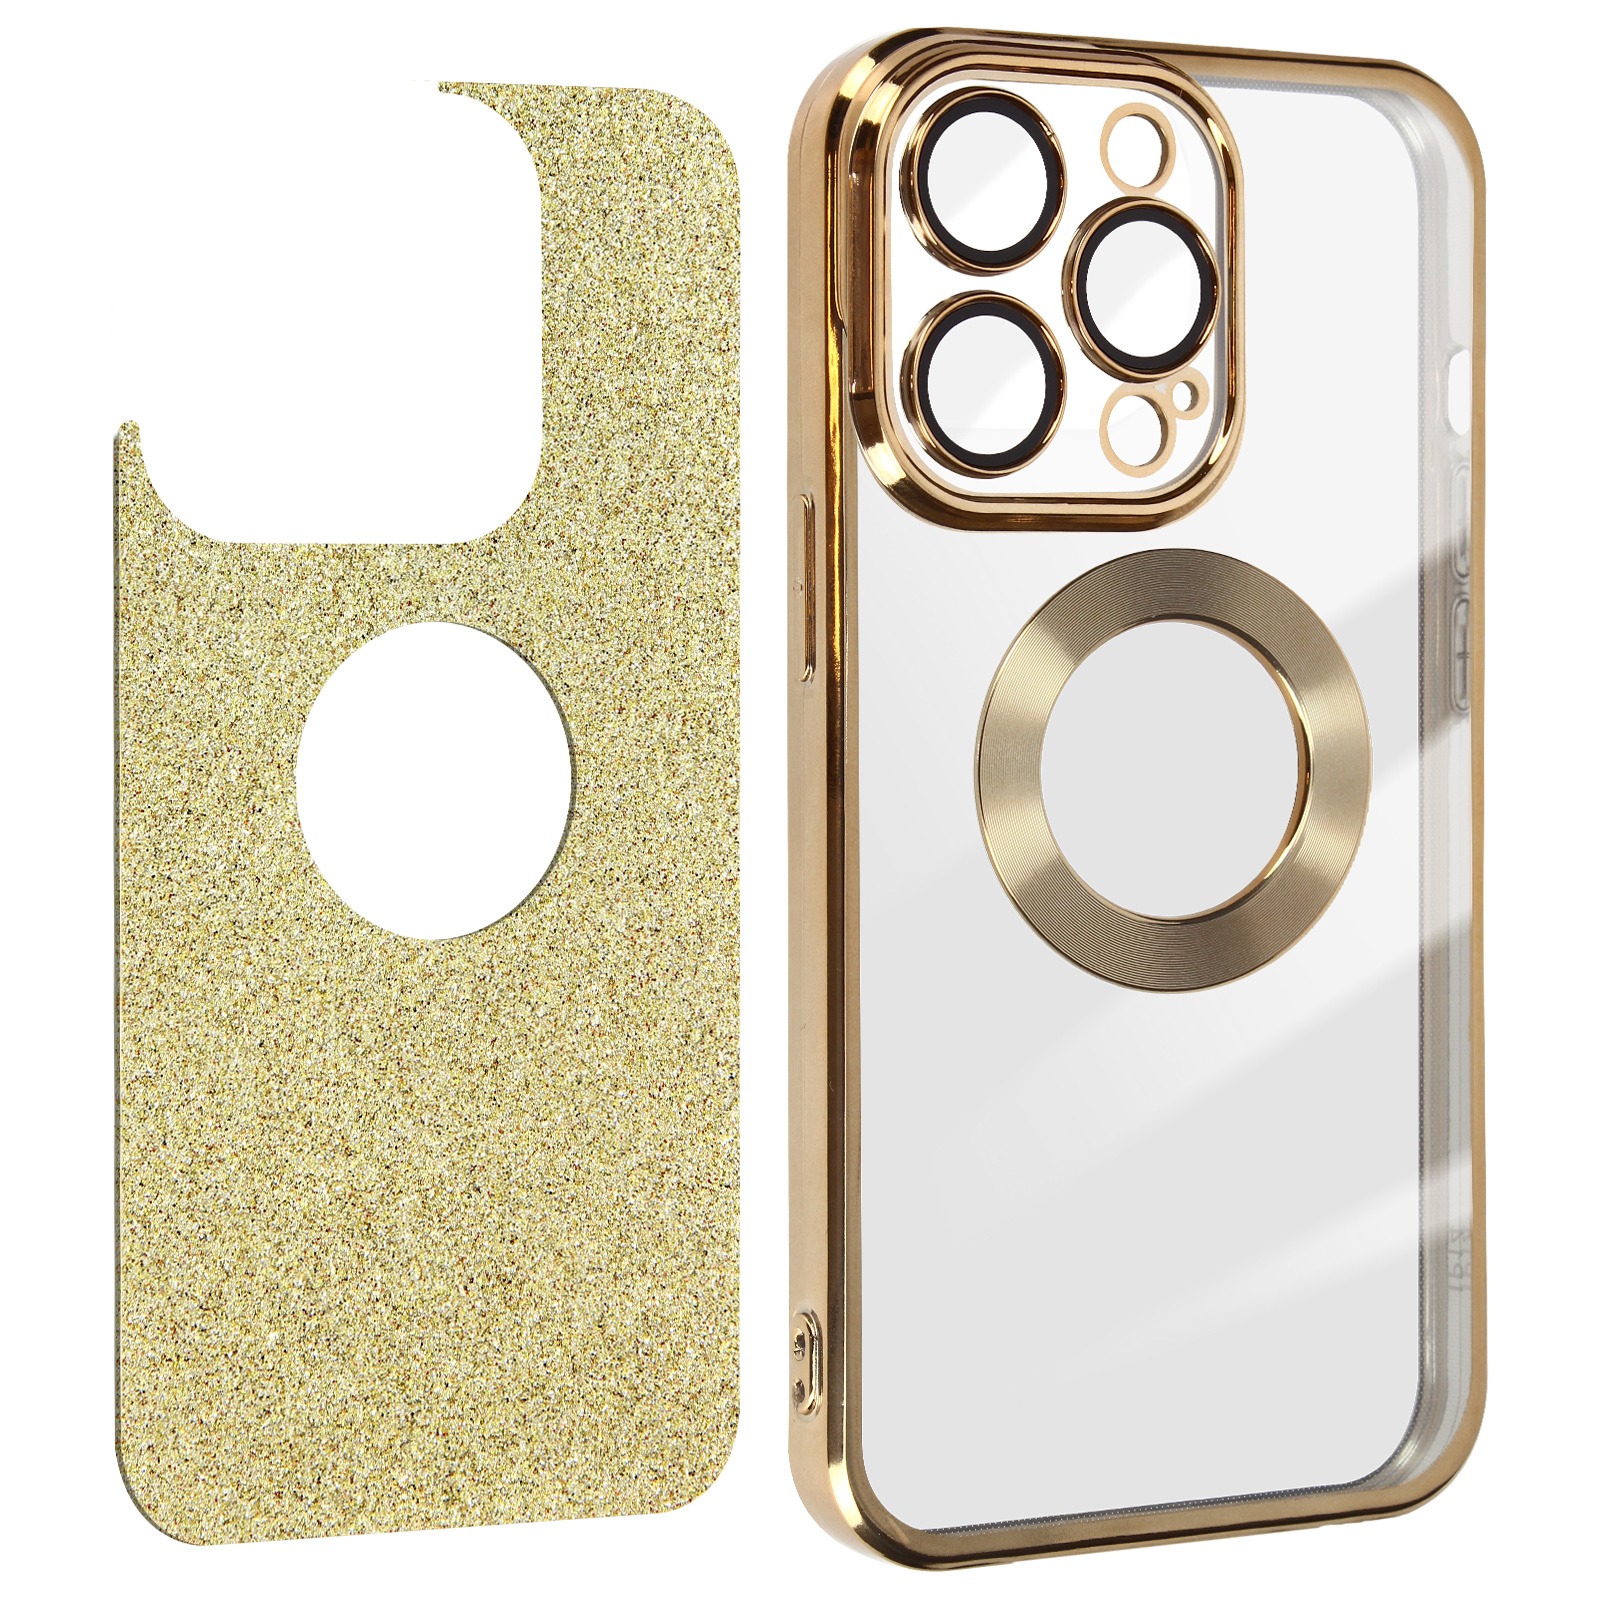 Backcover, Spark Protecam Apple, Gold Series, AVIZAR Pro 14 Max, iPhone